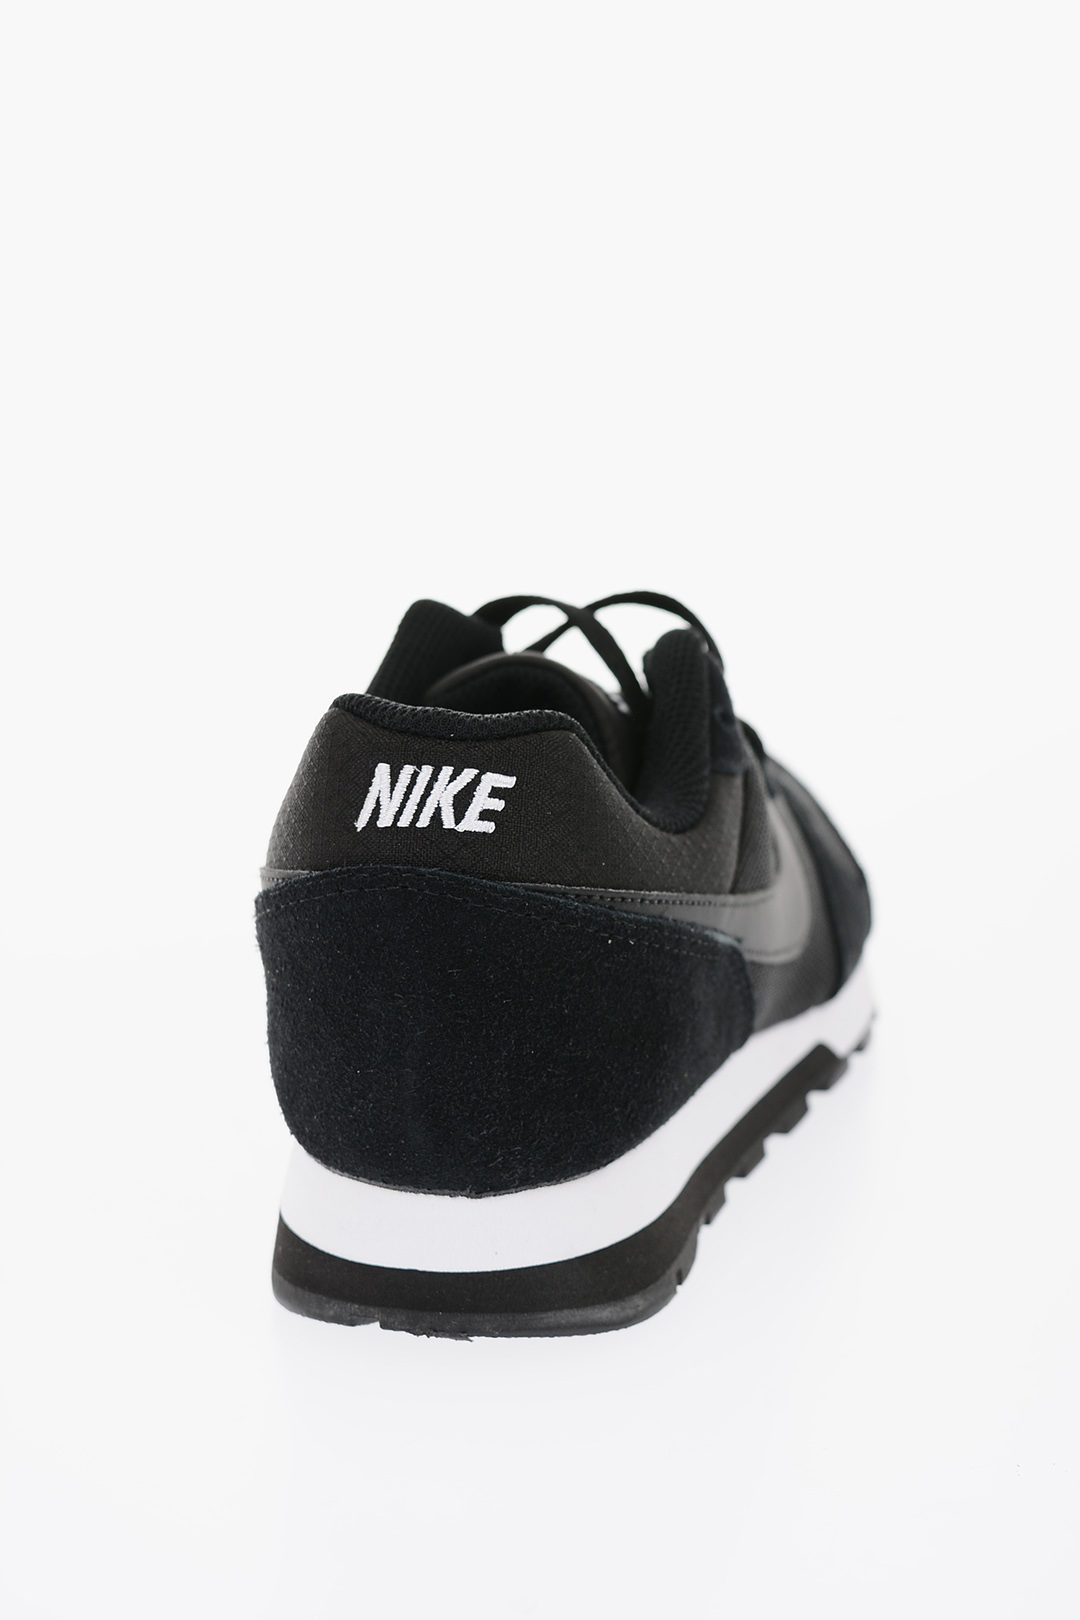 índice Árbol Regularidad Nike Leather and Fabric NIKE MD RUNNER 2 Sneakers women - Glamood Outlet